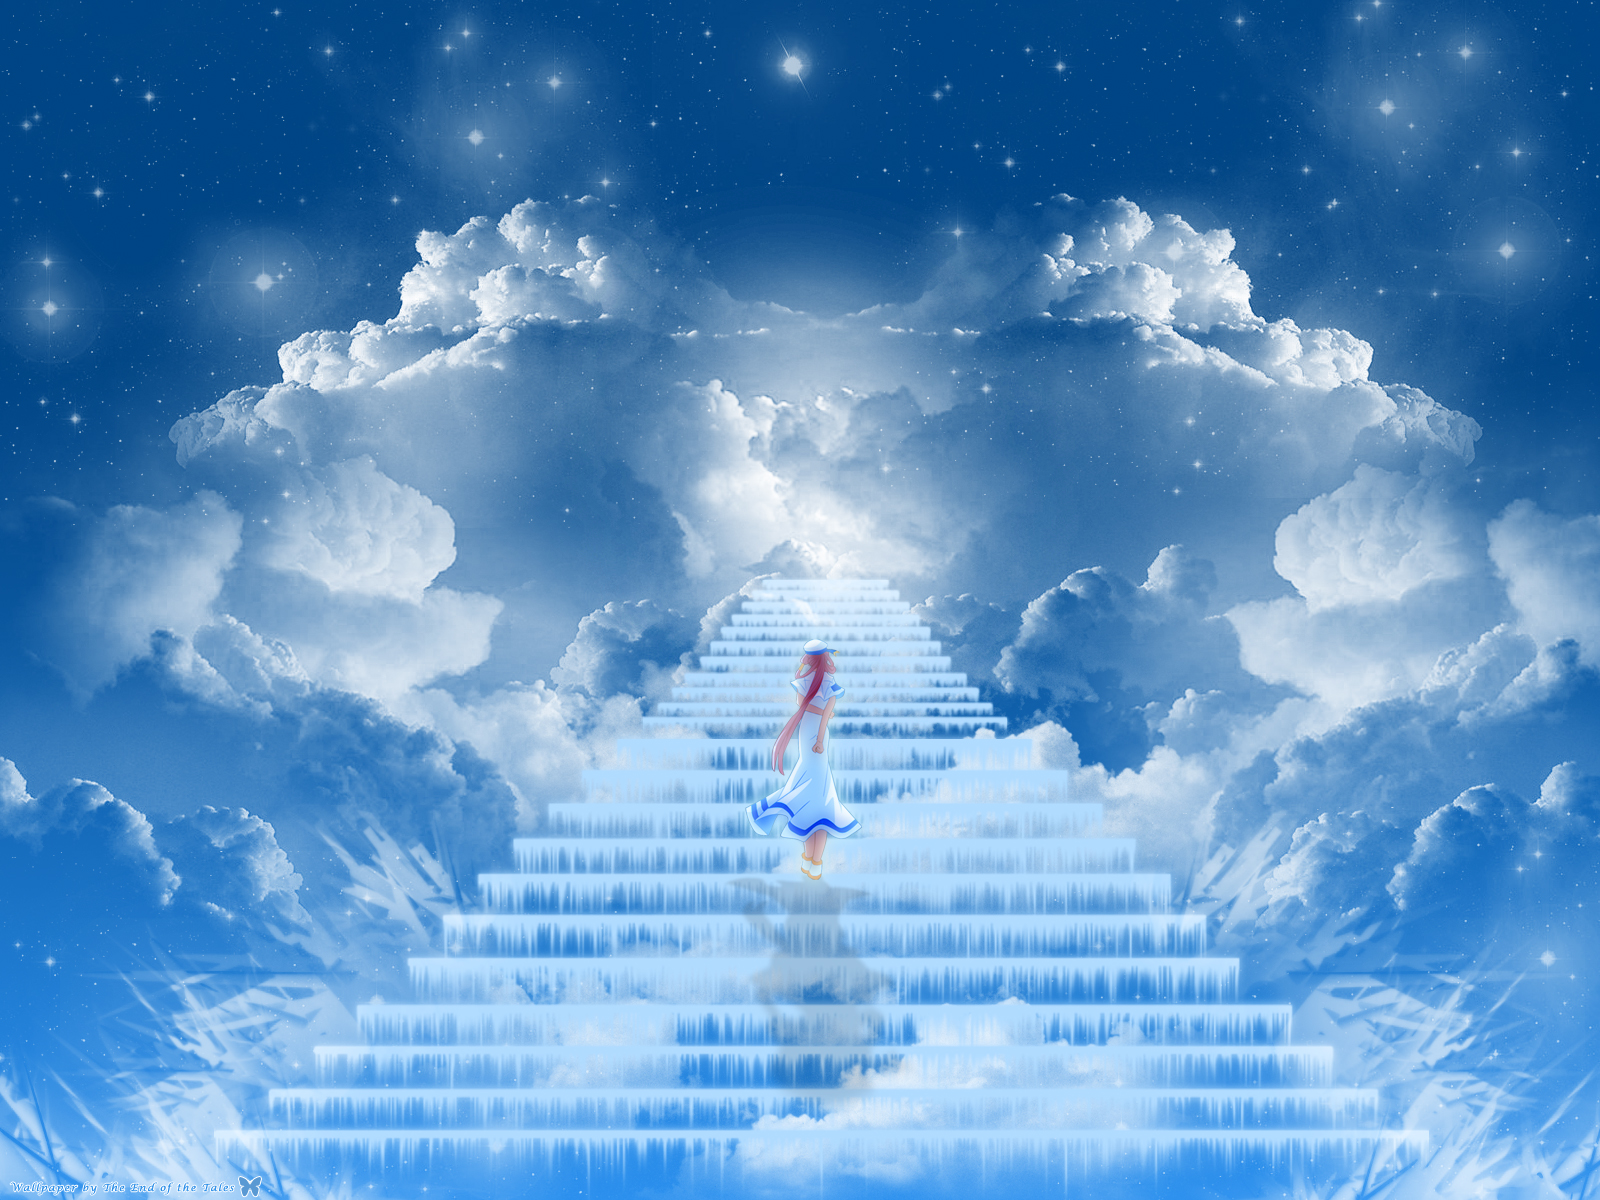 Stairway To Heaven Wallpapers #395385 (1600x1200)